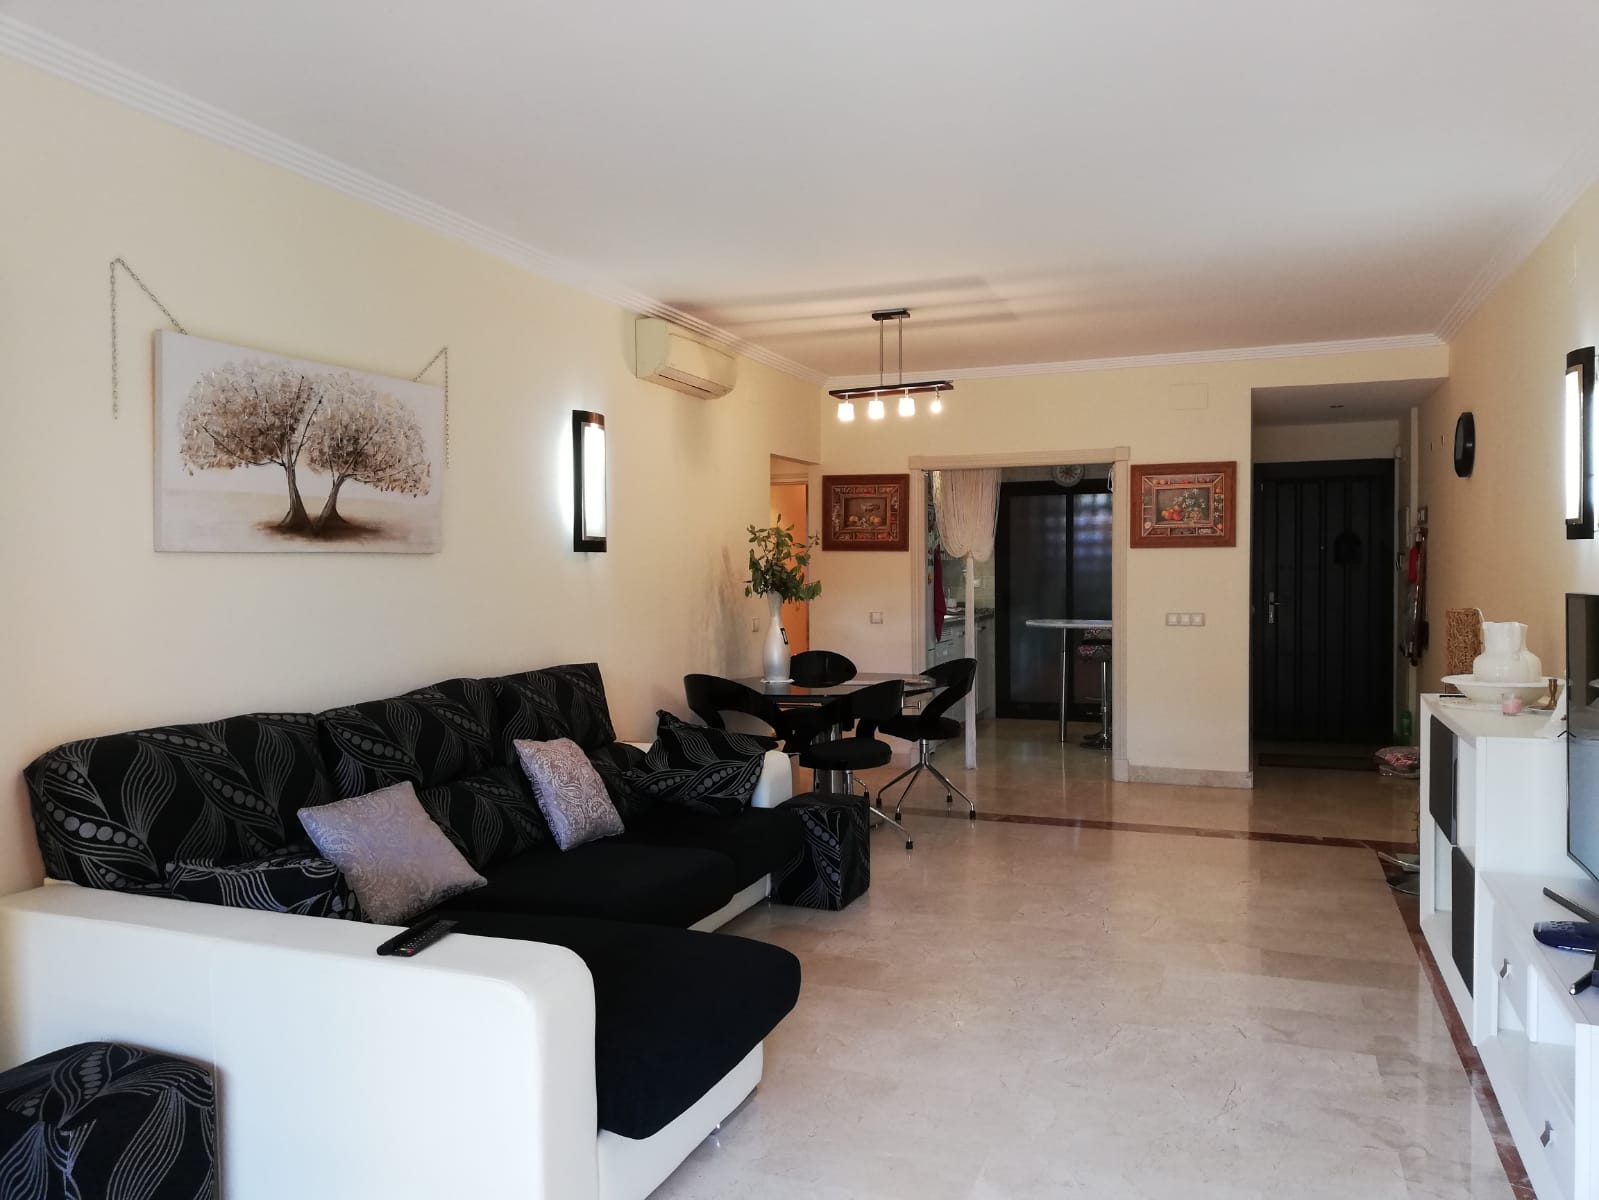 2 bedroom apartment for sale in Costa Galera 200 meters from the beach - mibgroup.es